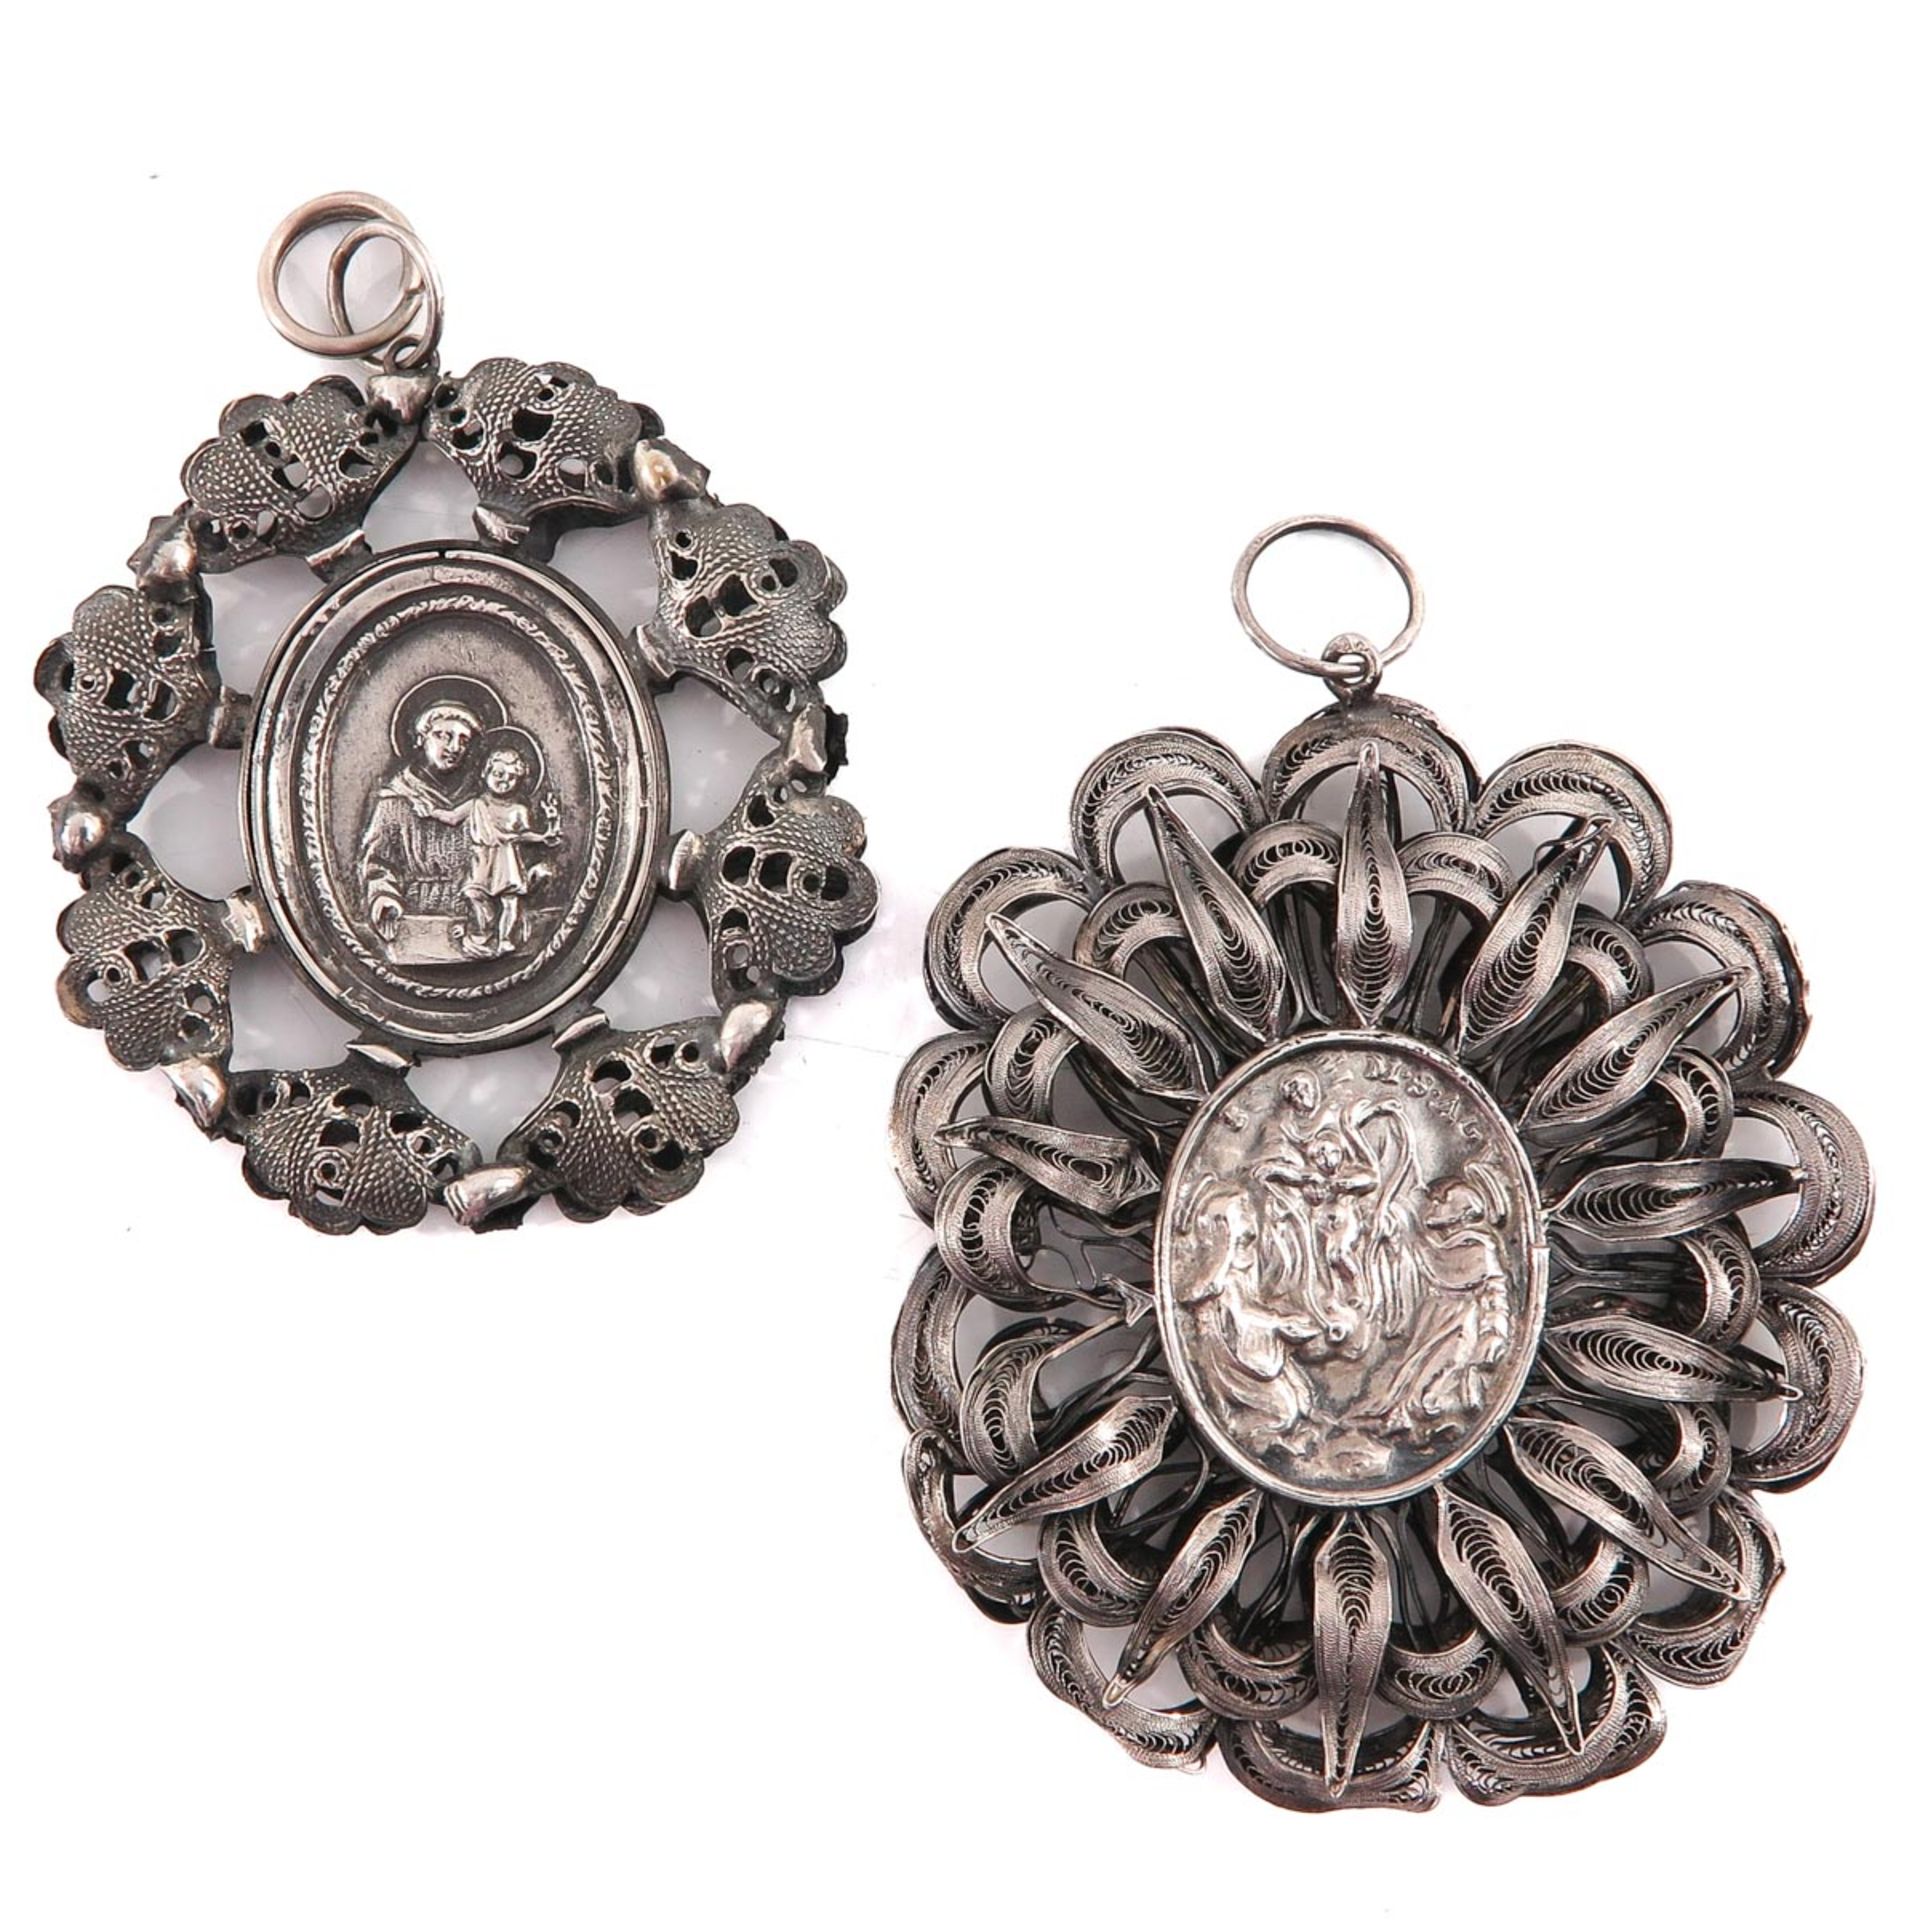 A Lot of 2 Silver Religious Medallions - Image 2 of 6